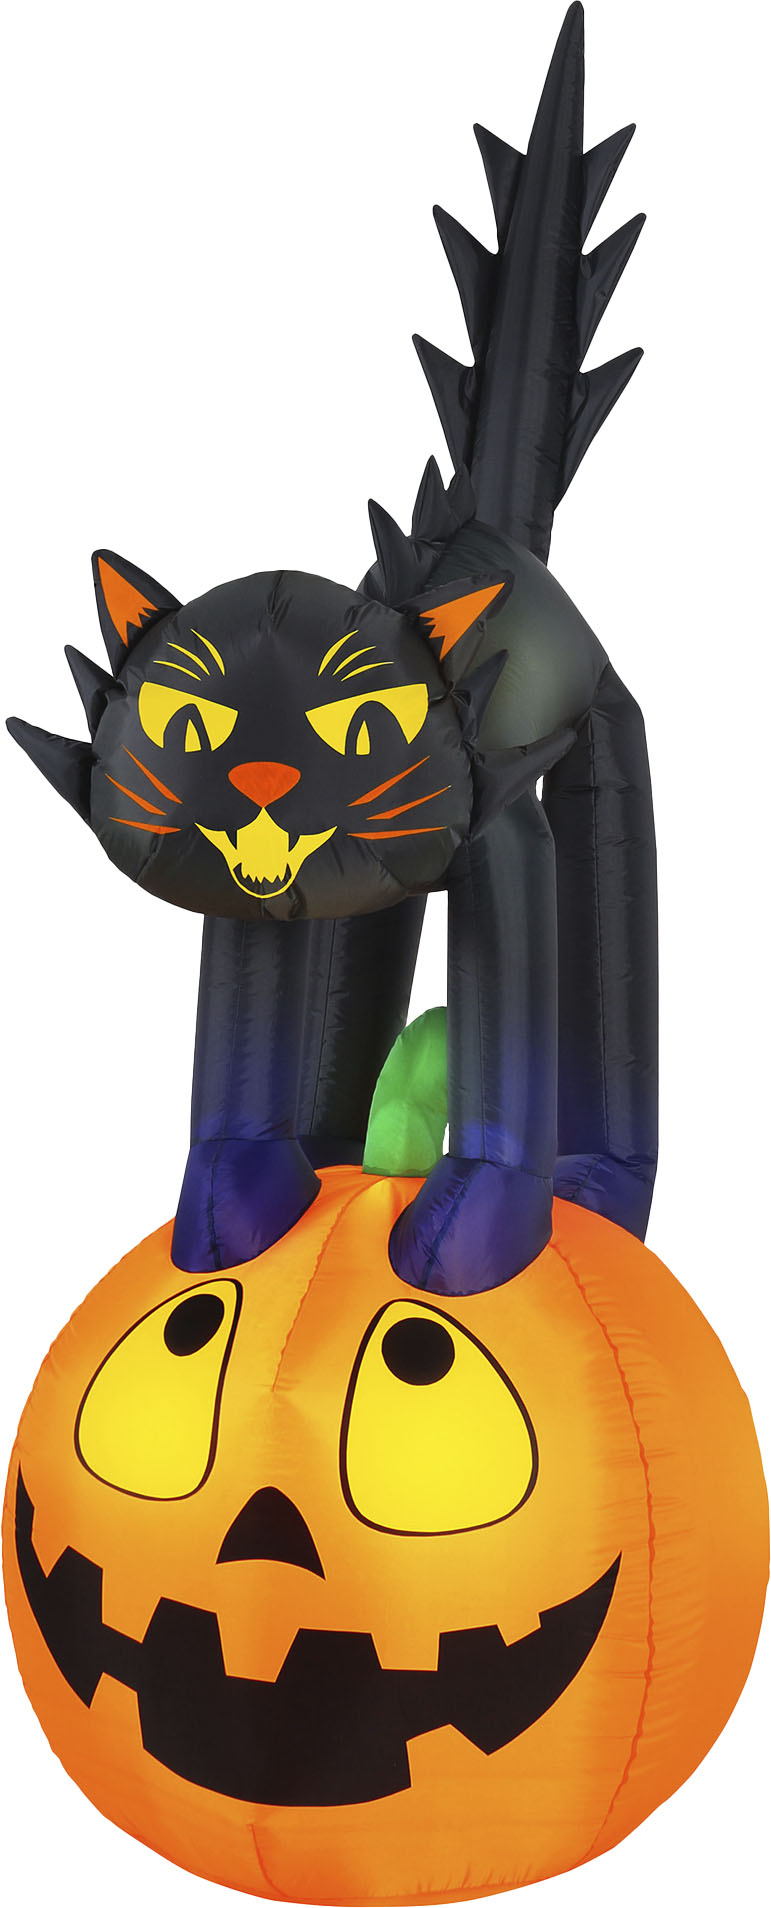 Occasions 7' Tall Inflatable Black Cat on Pumpkin